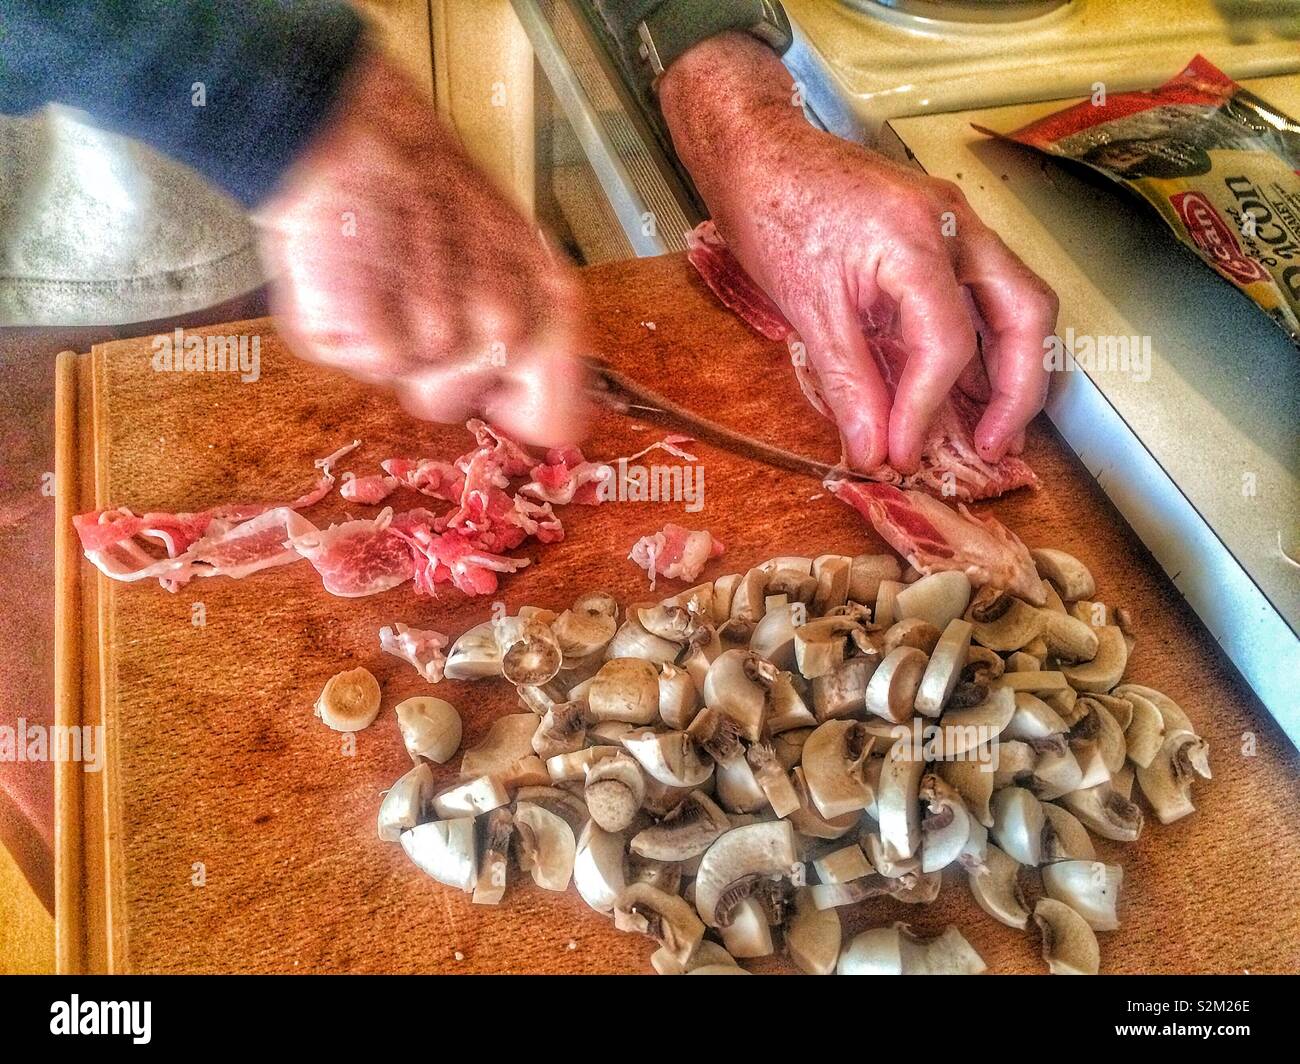 Man slicing bacon and mushrooms on pull out chopping board in a Swedish home kitchen, Sweden, Scandinavia Stock Photo